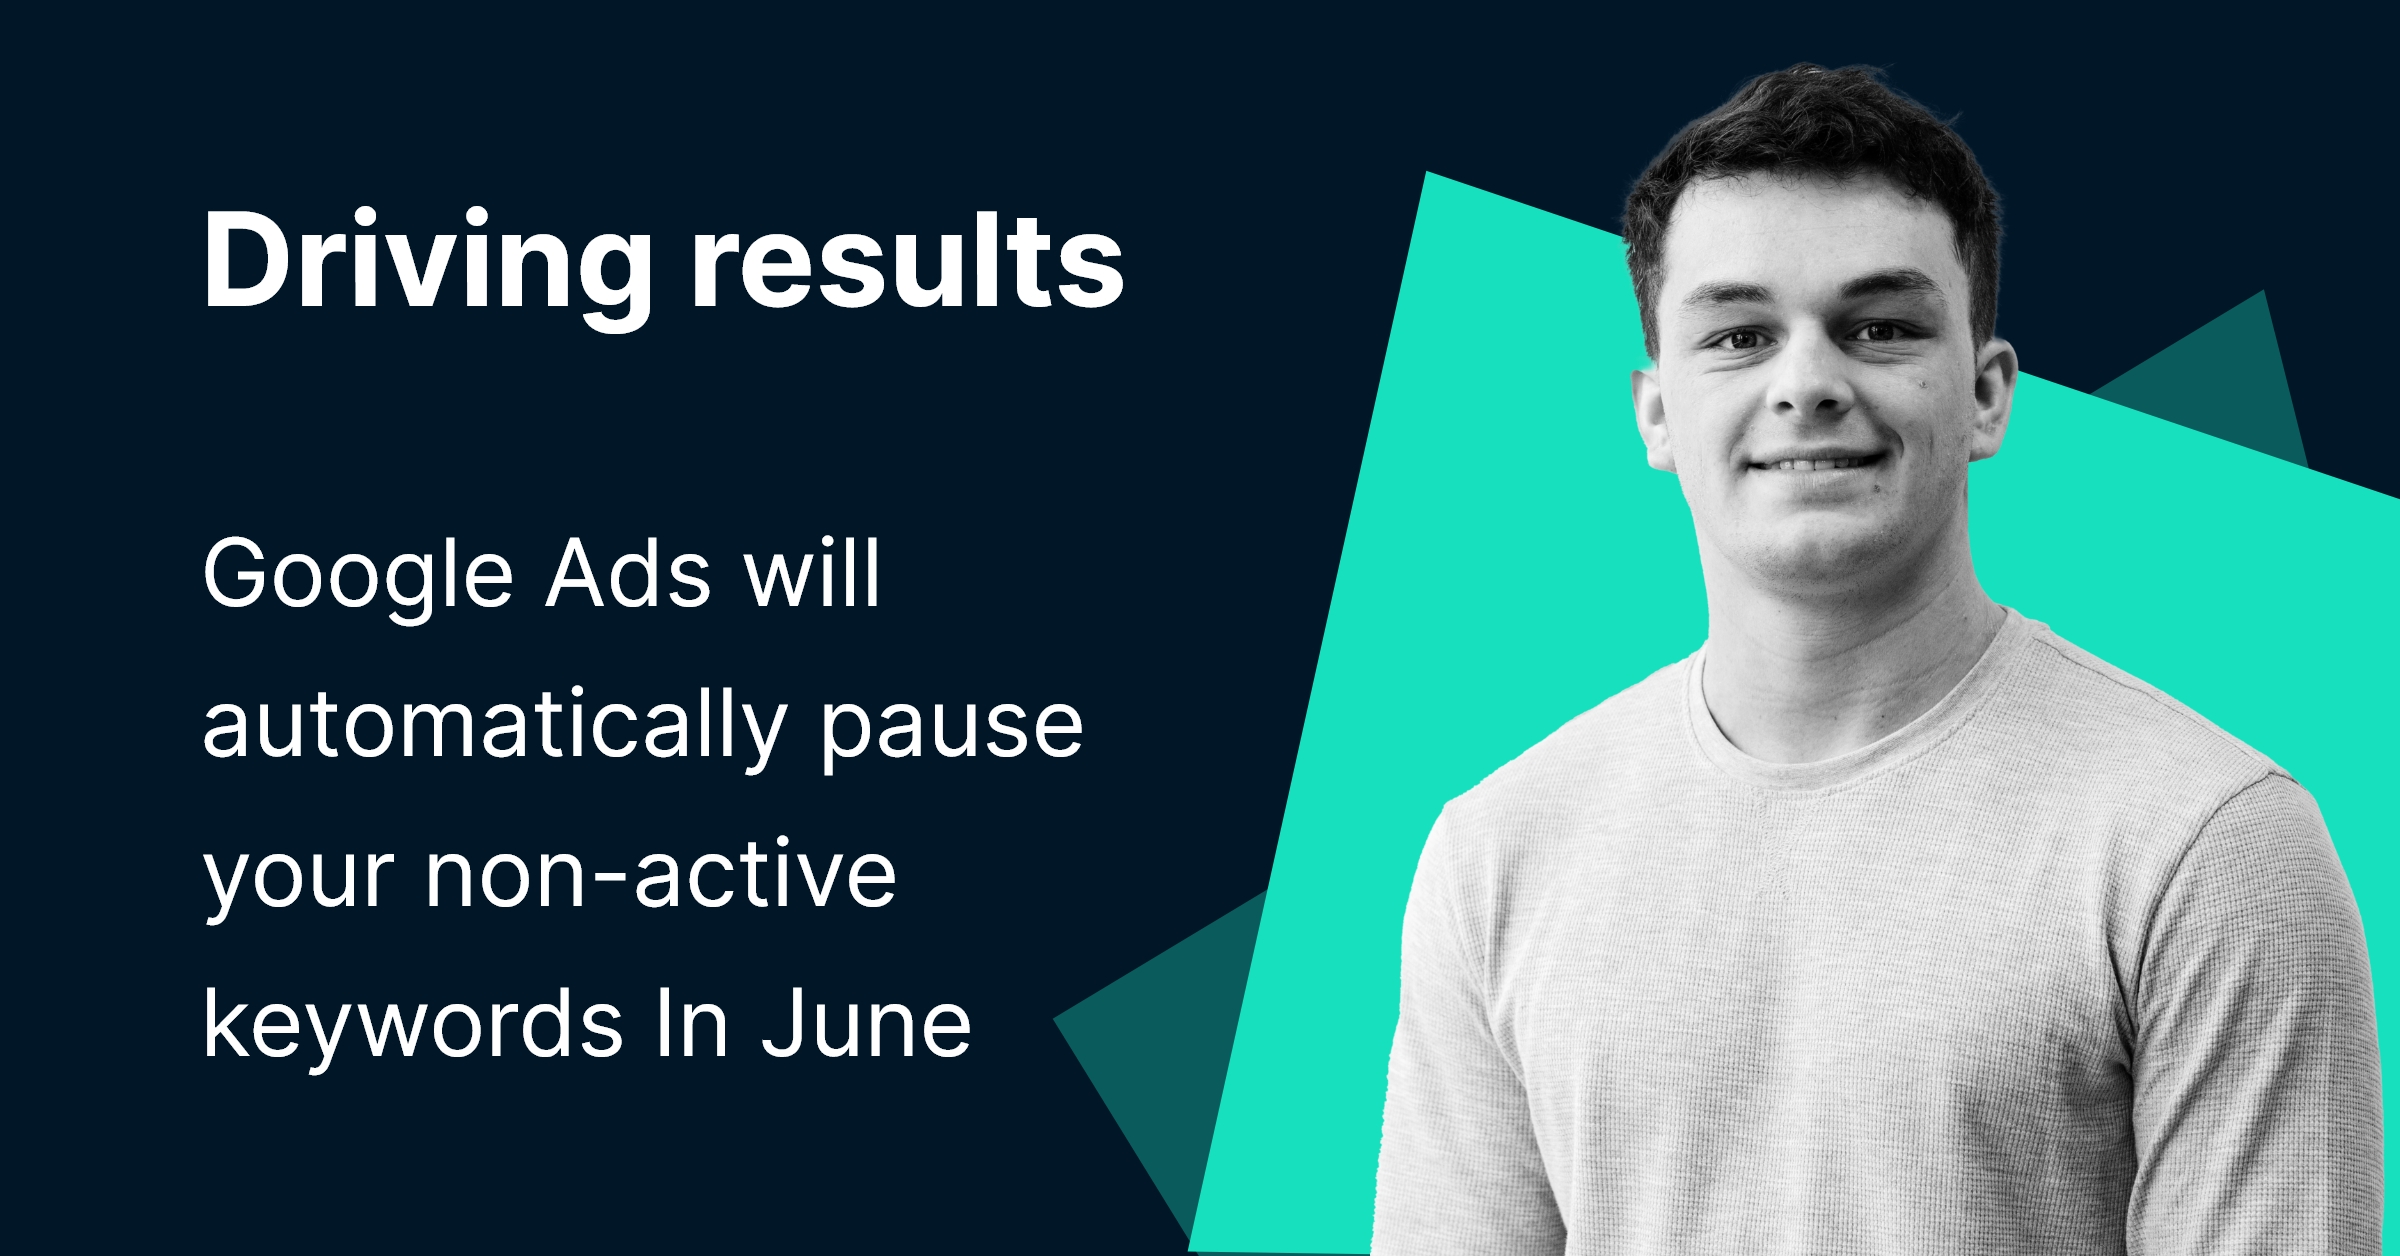 Driving results: Google Ads will automatically pause your non-active keywords In June